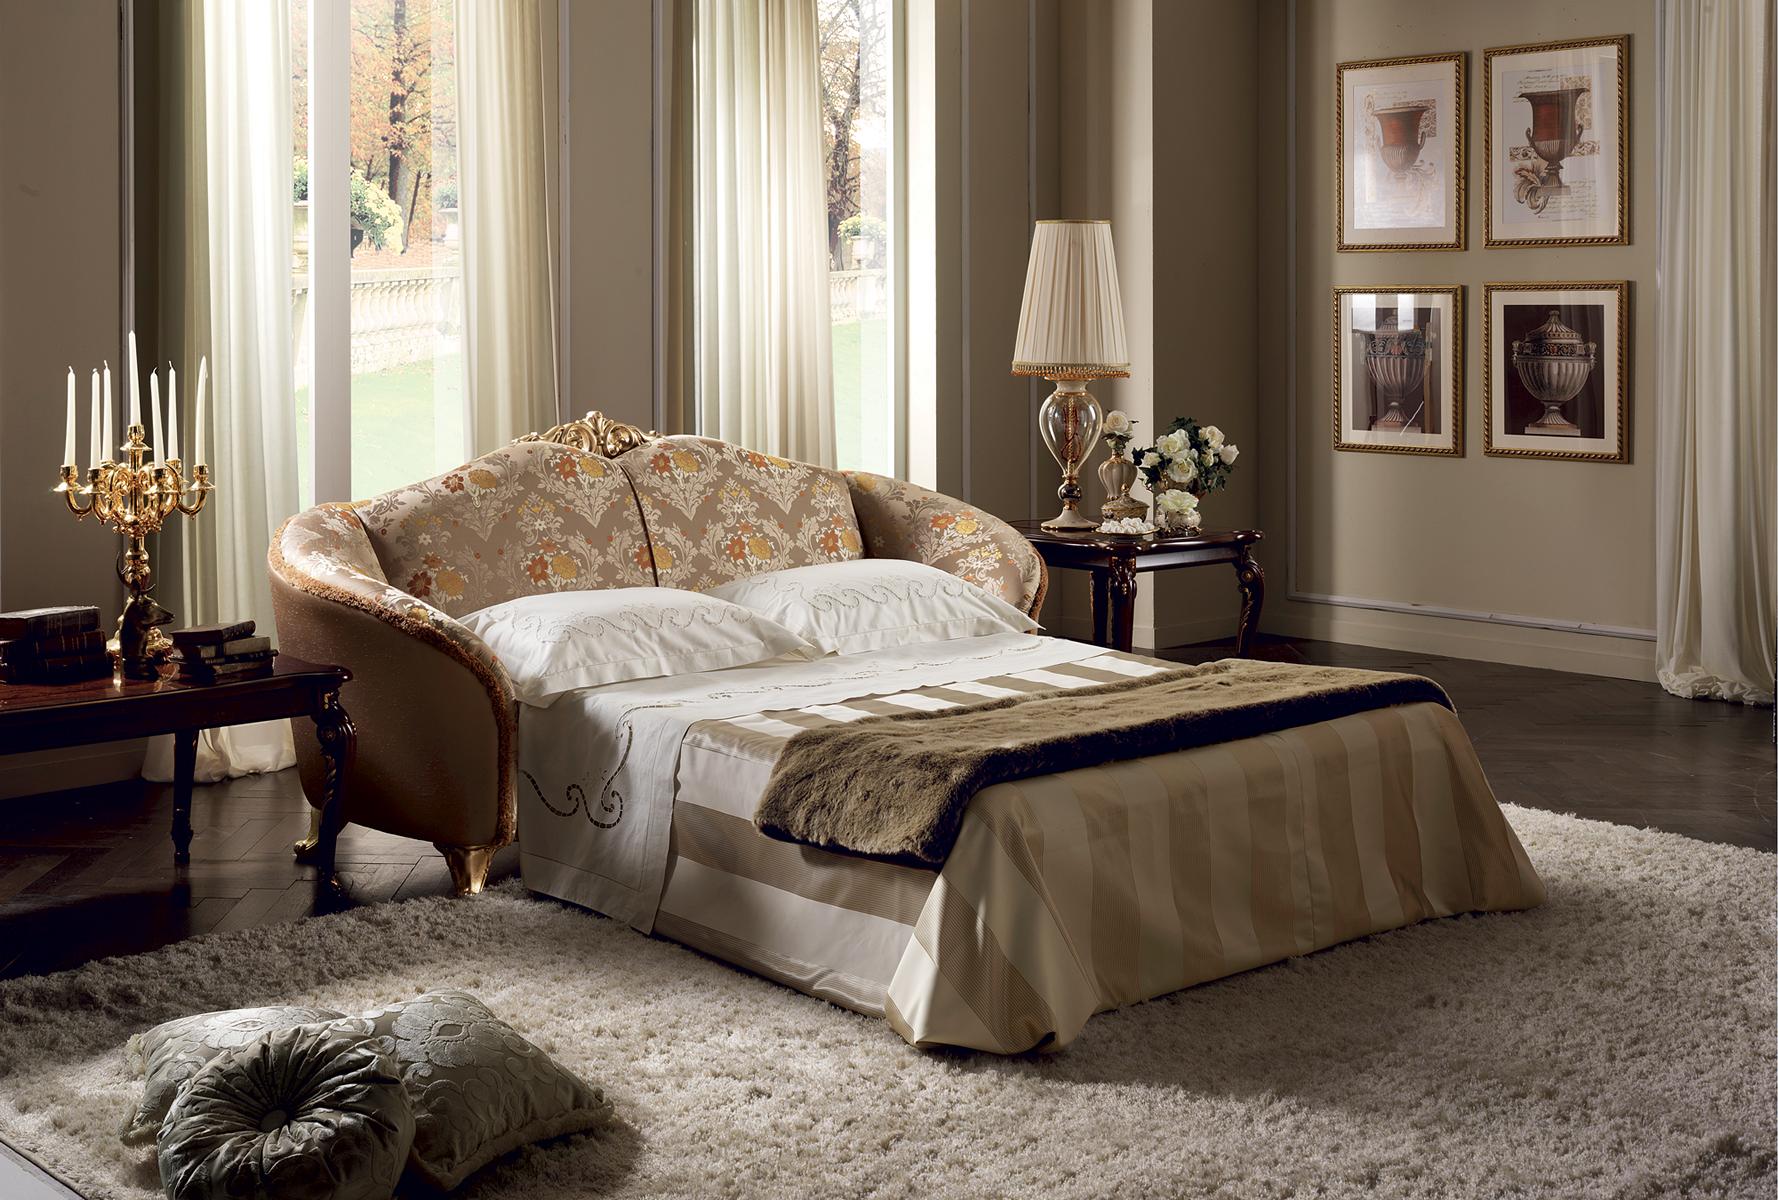 Bedroom/living room 3x seater sofa/couch transform to double bed in rococo style arredoclassic™